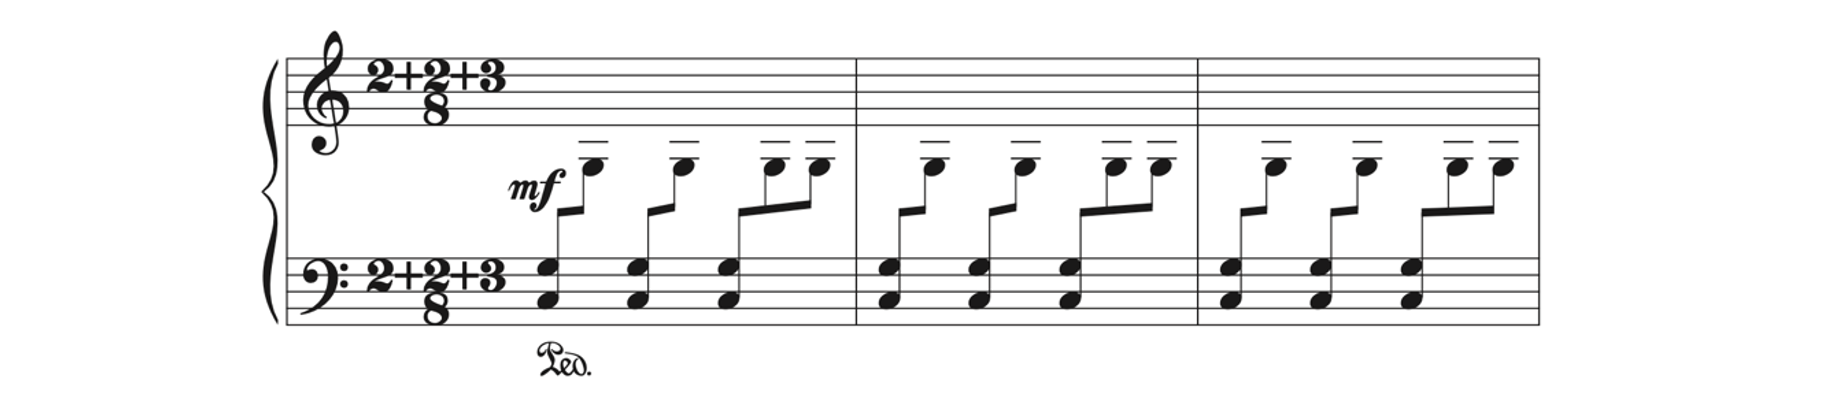 The composite meter of 2 plus 2 plus 3 over 8 in Bartok's Second Dance in Bulgarian Rhythm.